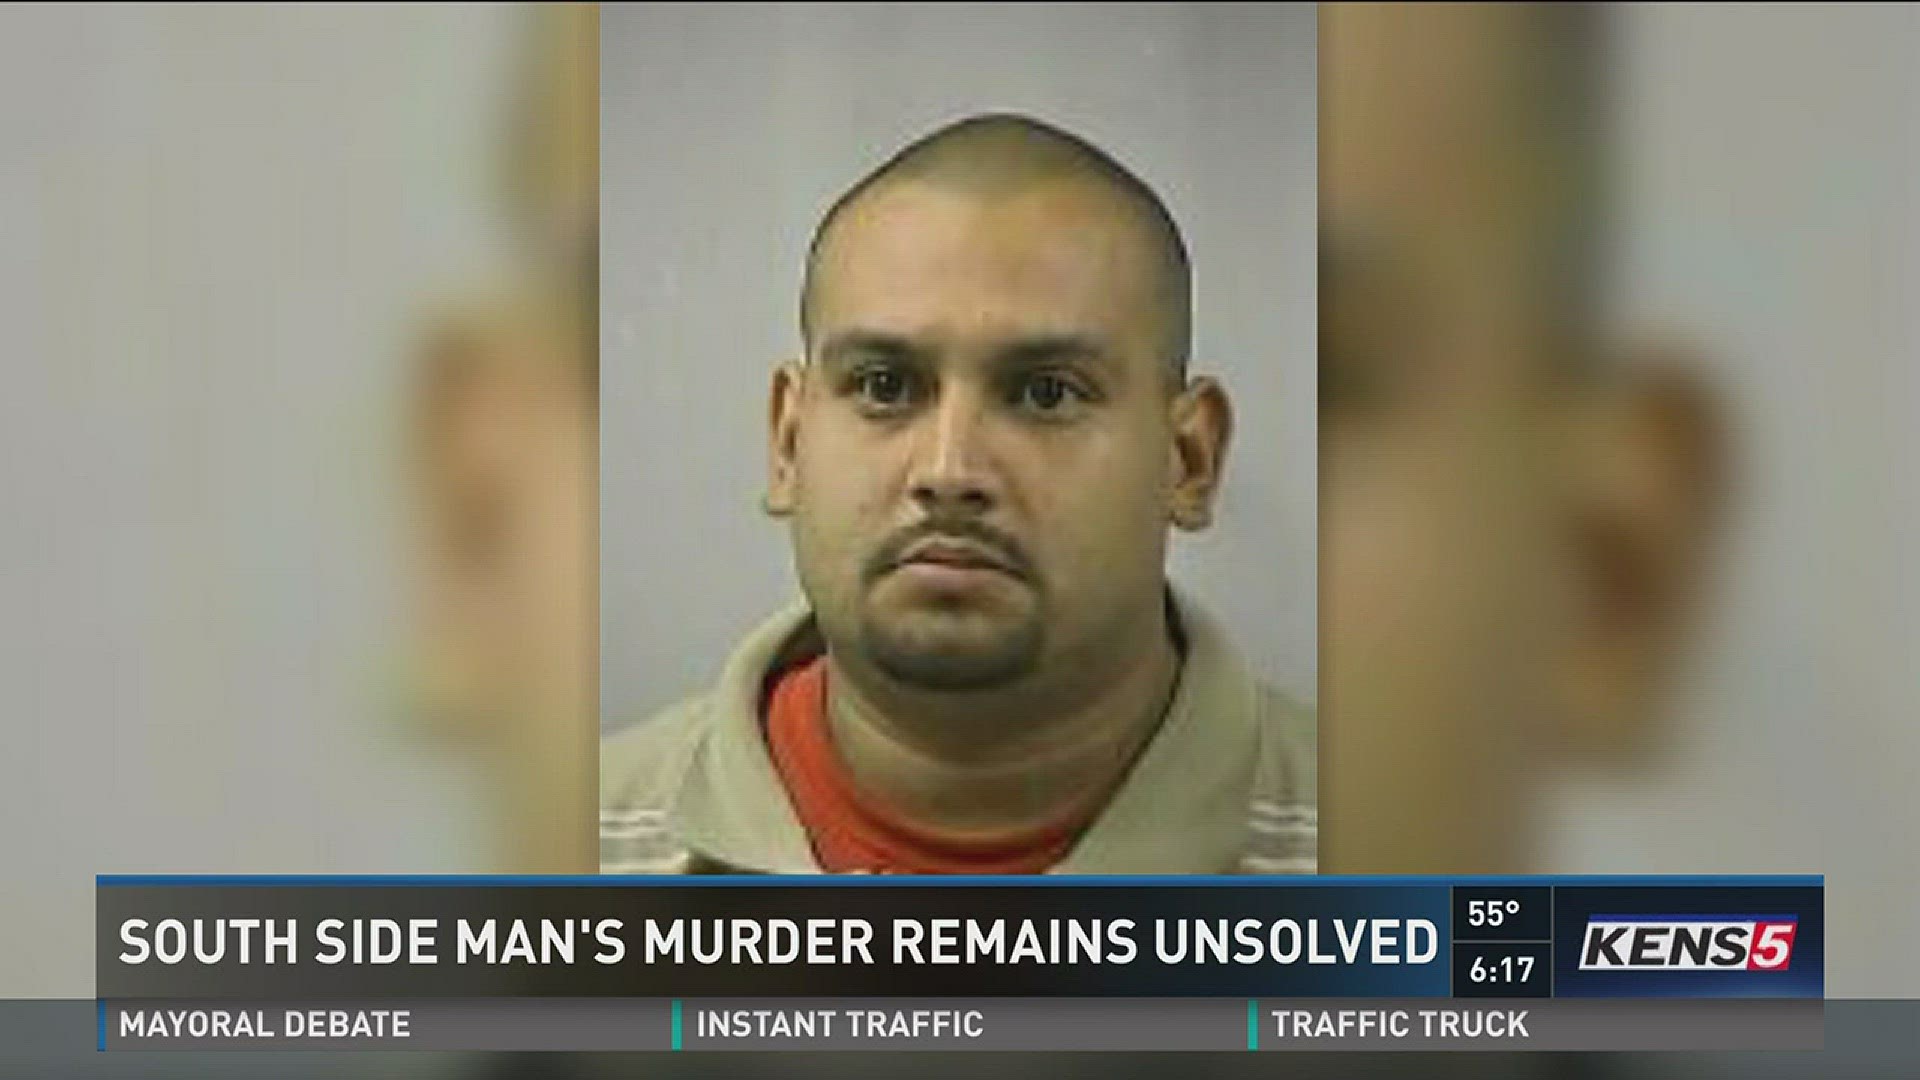 South side man's murder remains unsolved